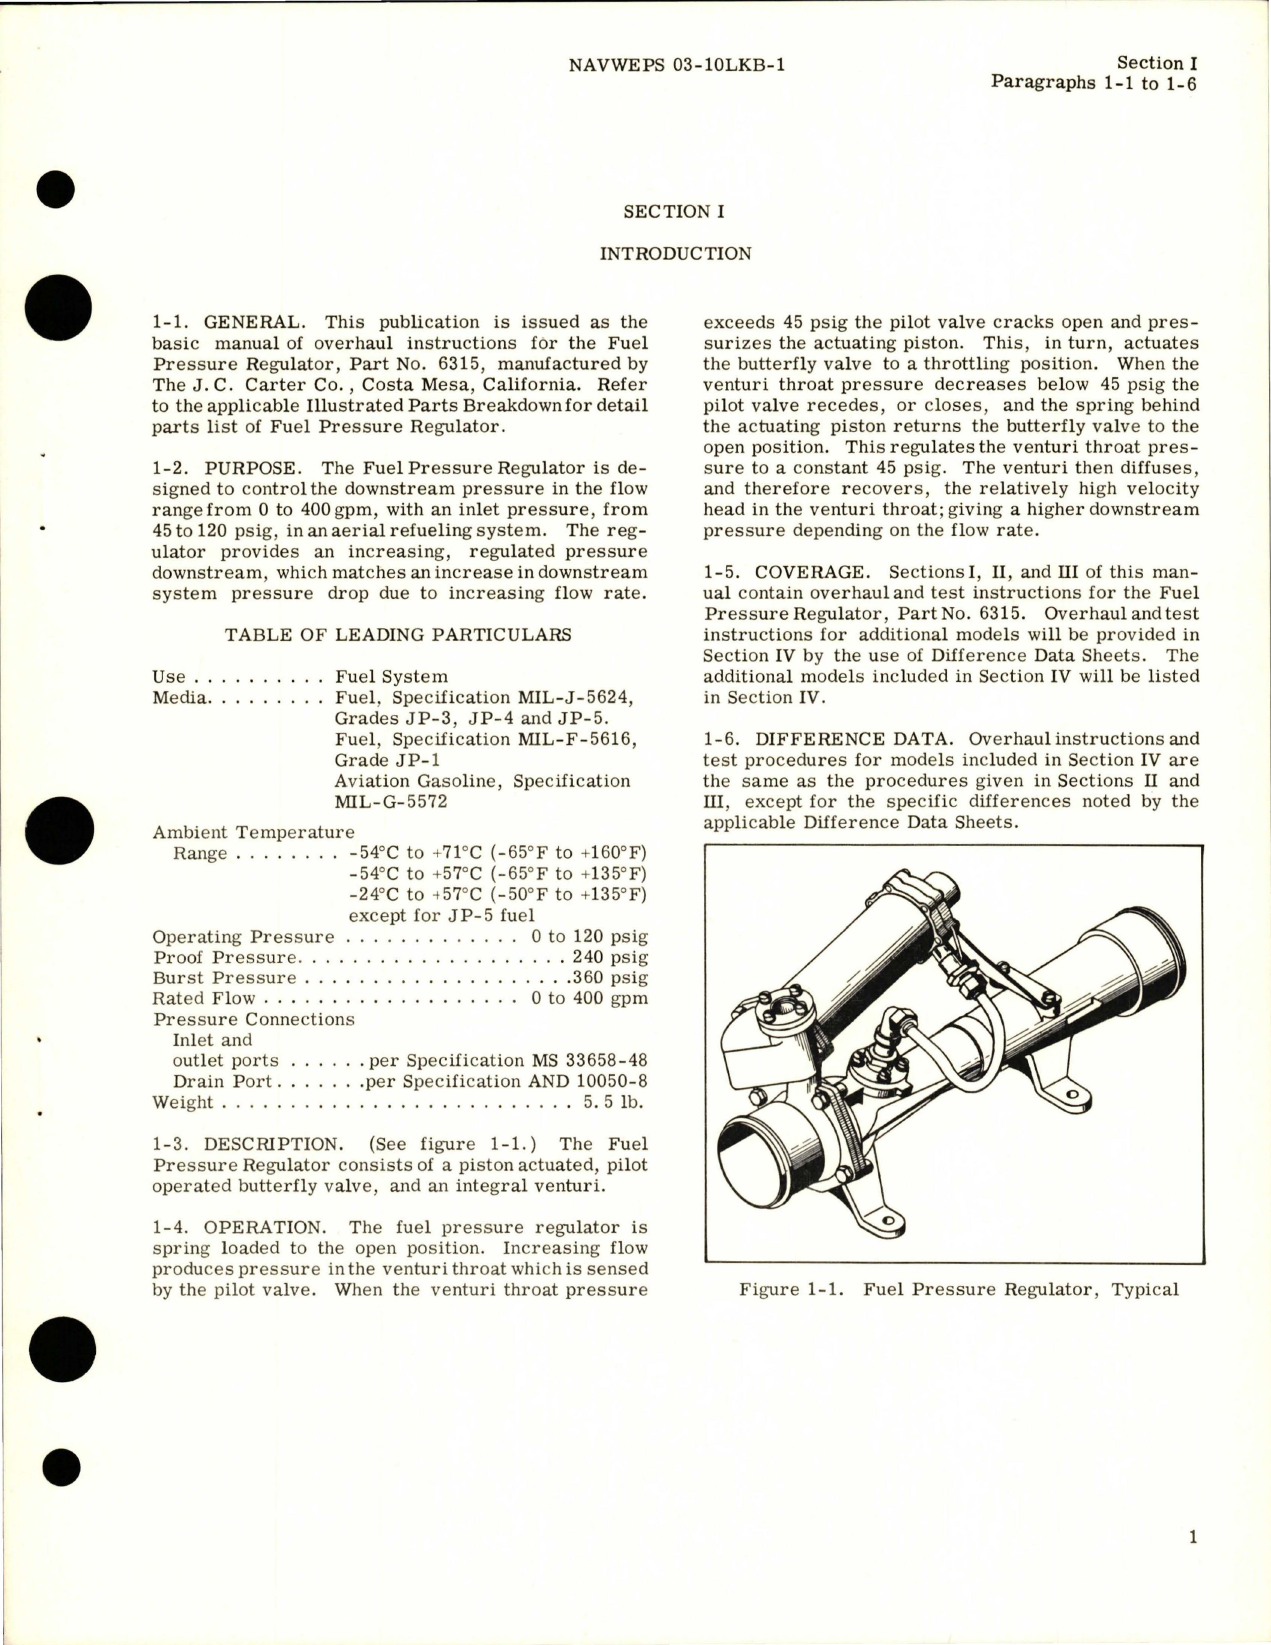 Sample page 5 from AirCorps Library document: Overhaul Instructions for Fuel Pressure Regulator - Part 6315